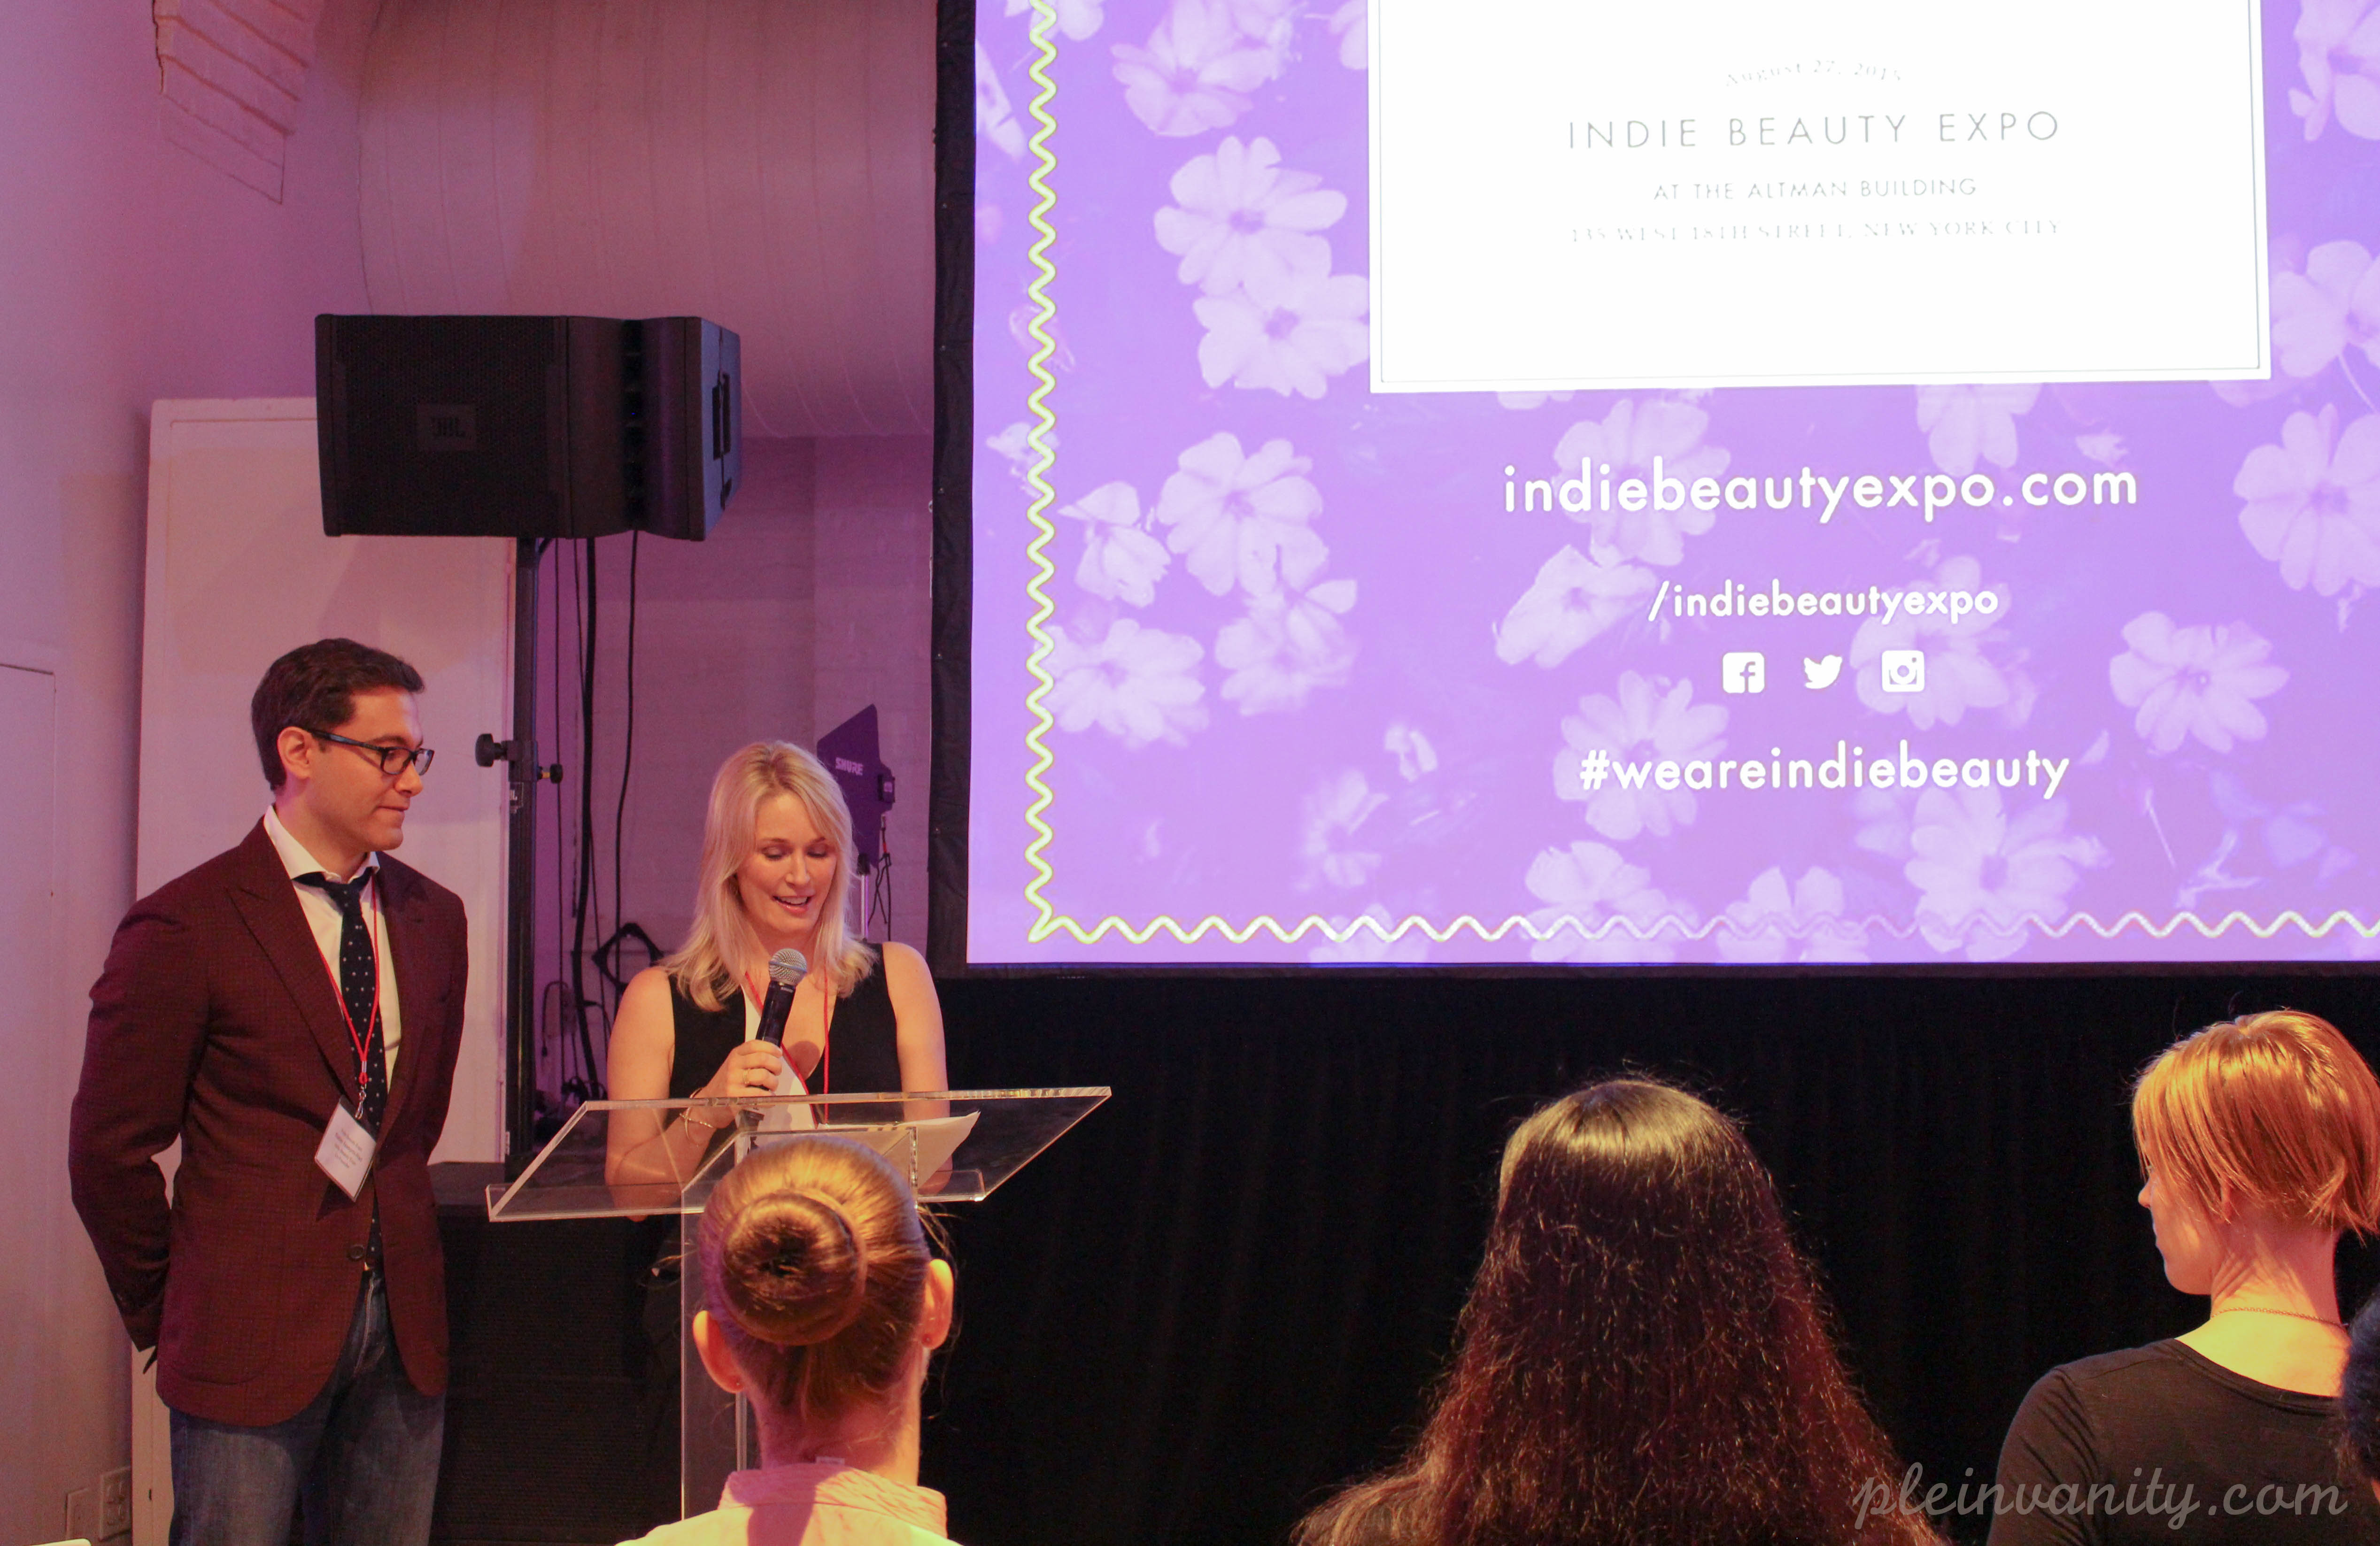 Indie Beauty Expo opening remarks